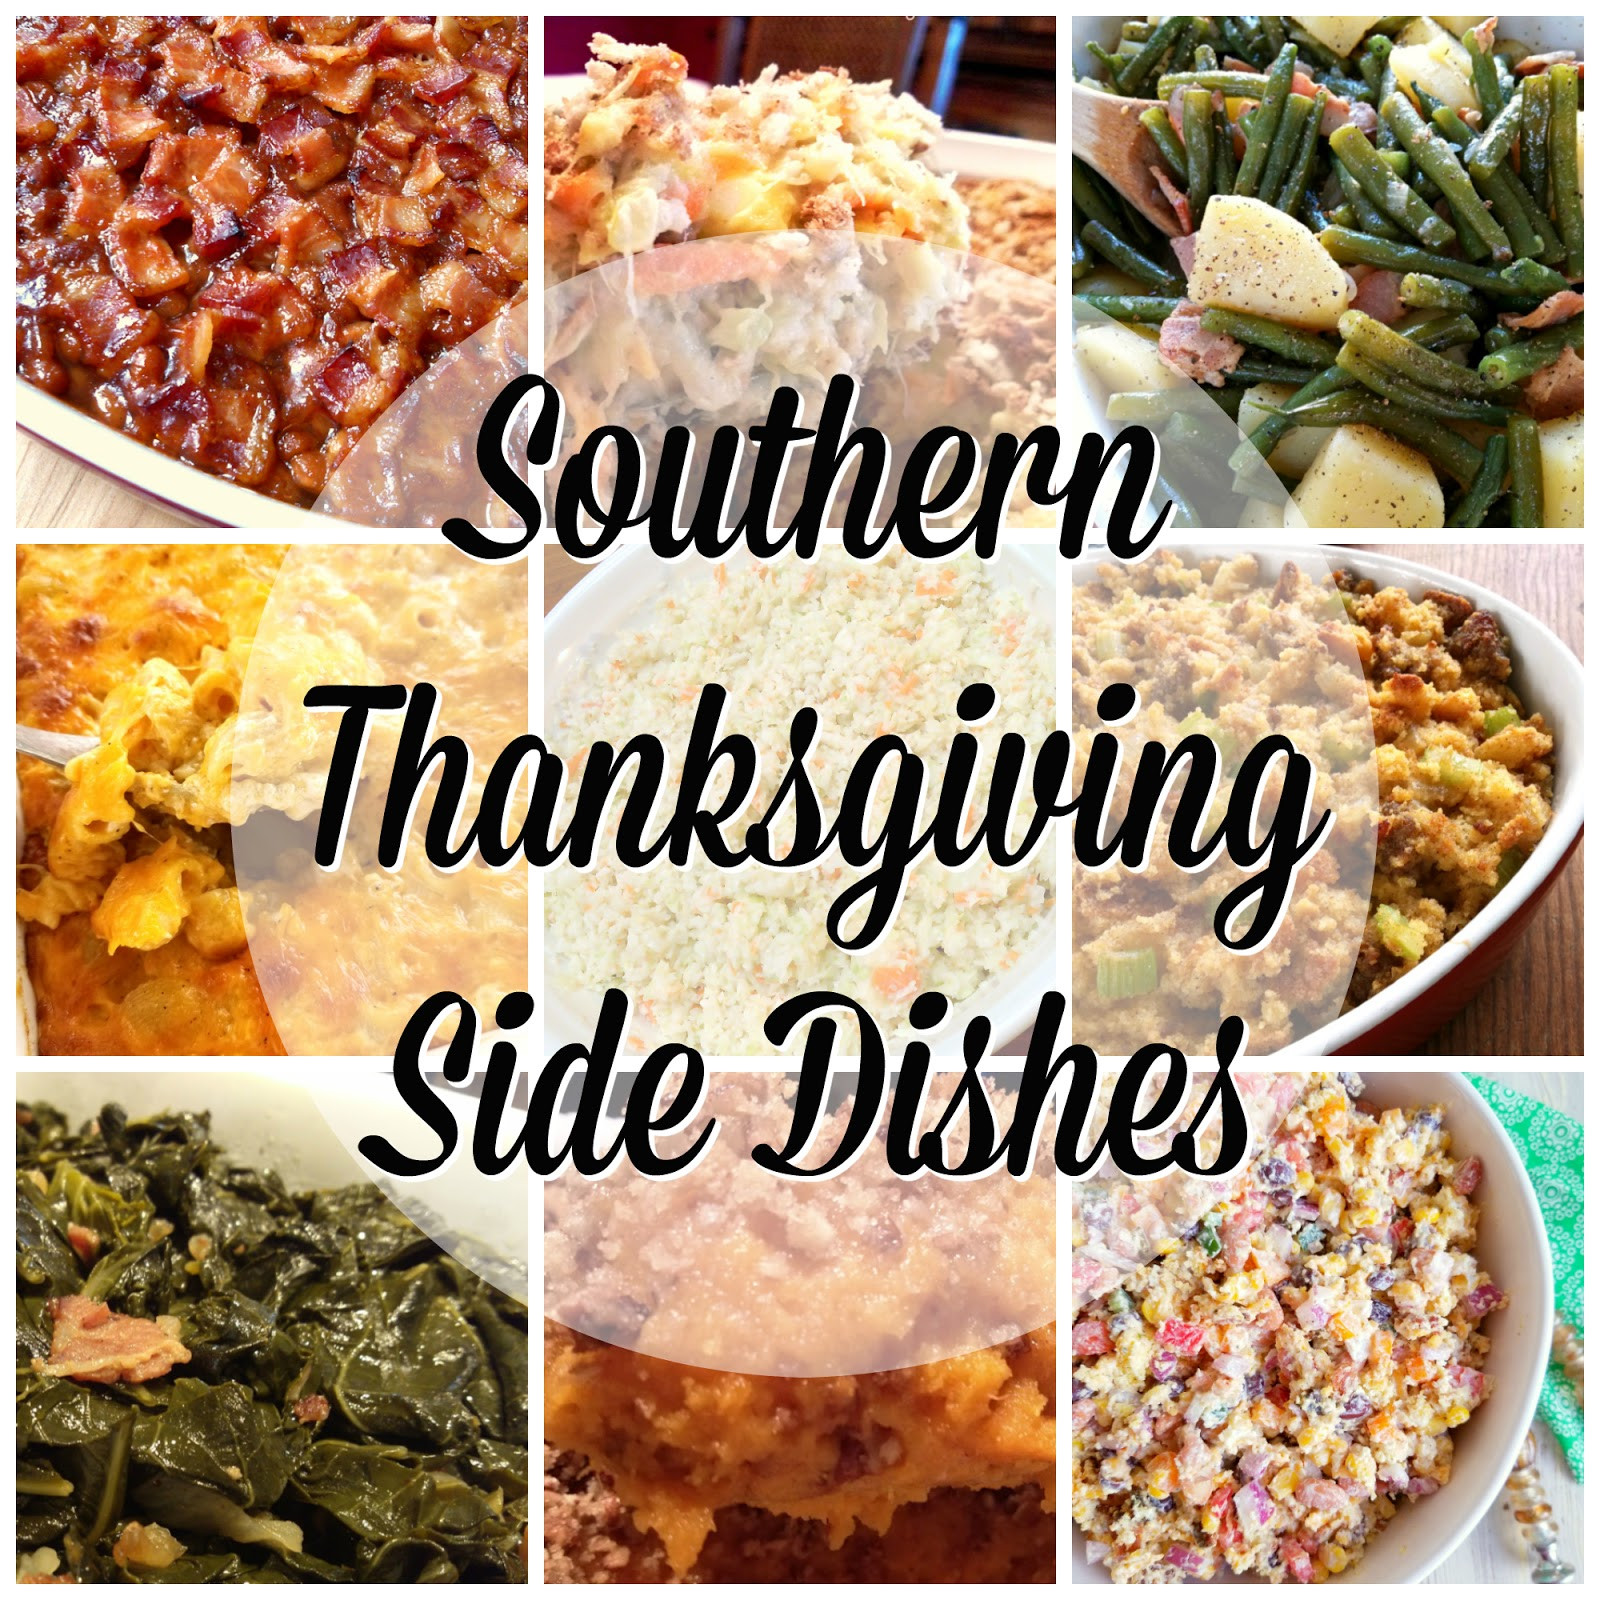 Southern Thanksgiving Side Dishes
 South Your Mouth Southern Thanksgiving Side Dishes